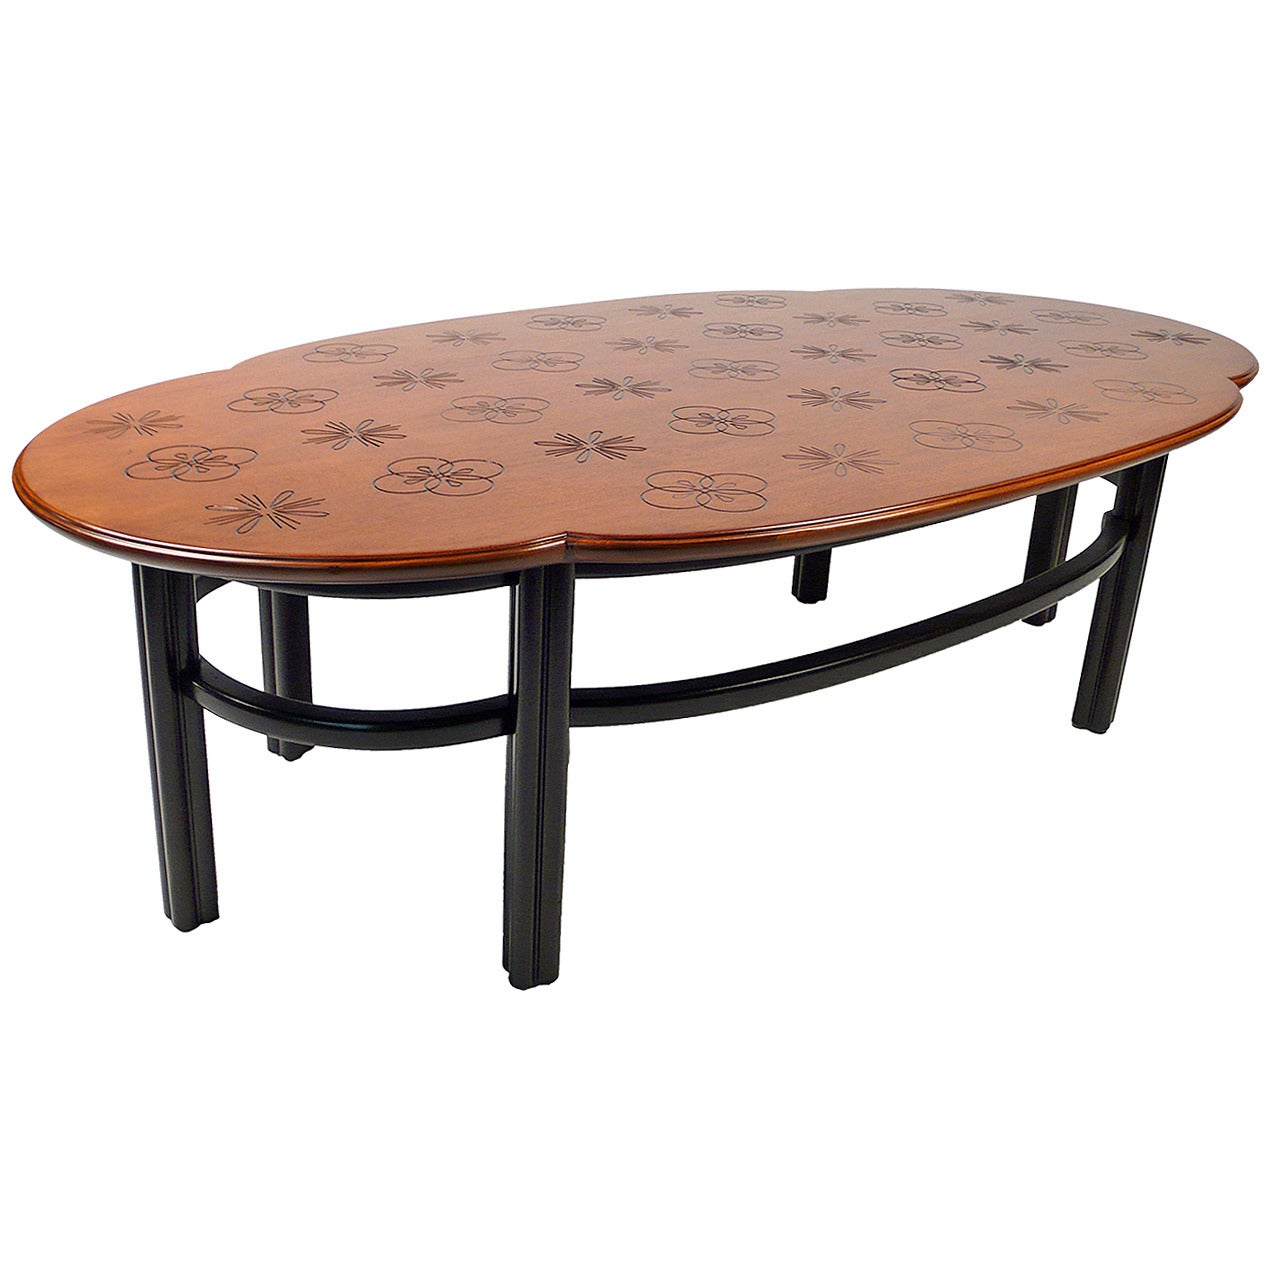 Oval Baker Coffee Table with Incised designs in the Manner of Dorothy Draper